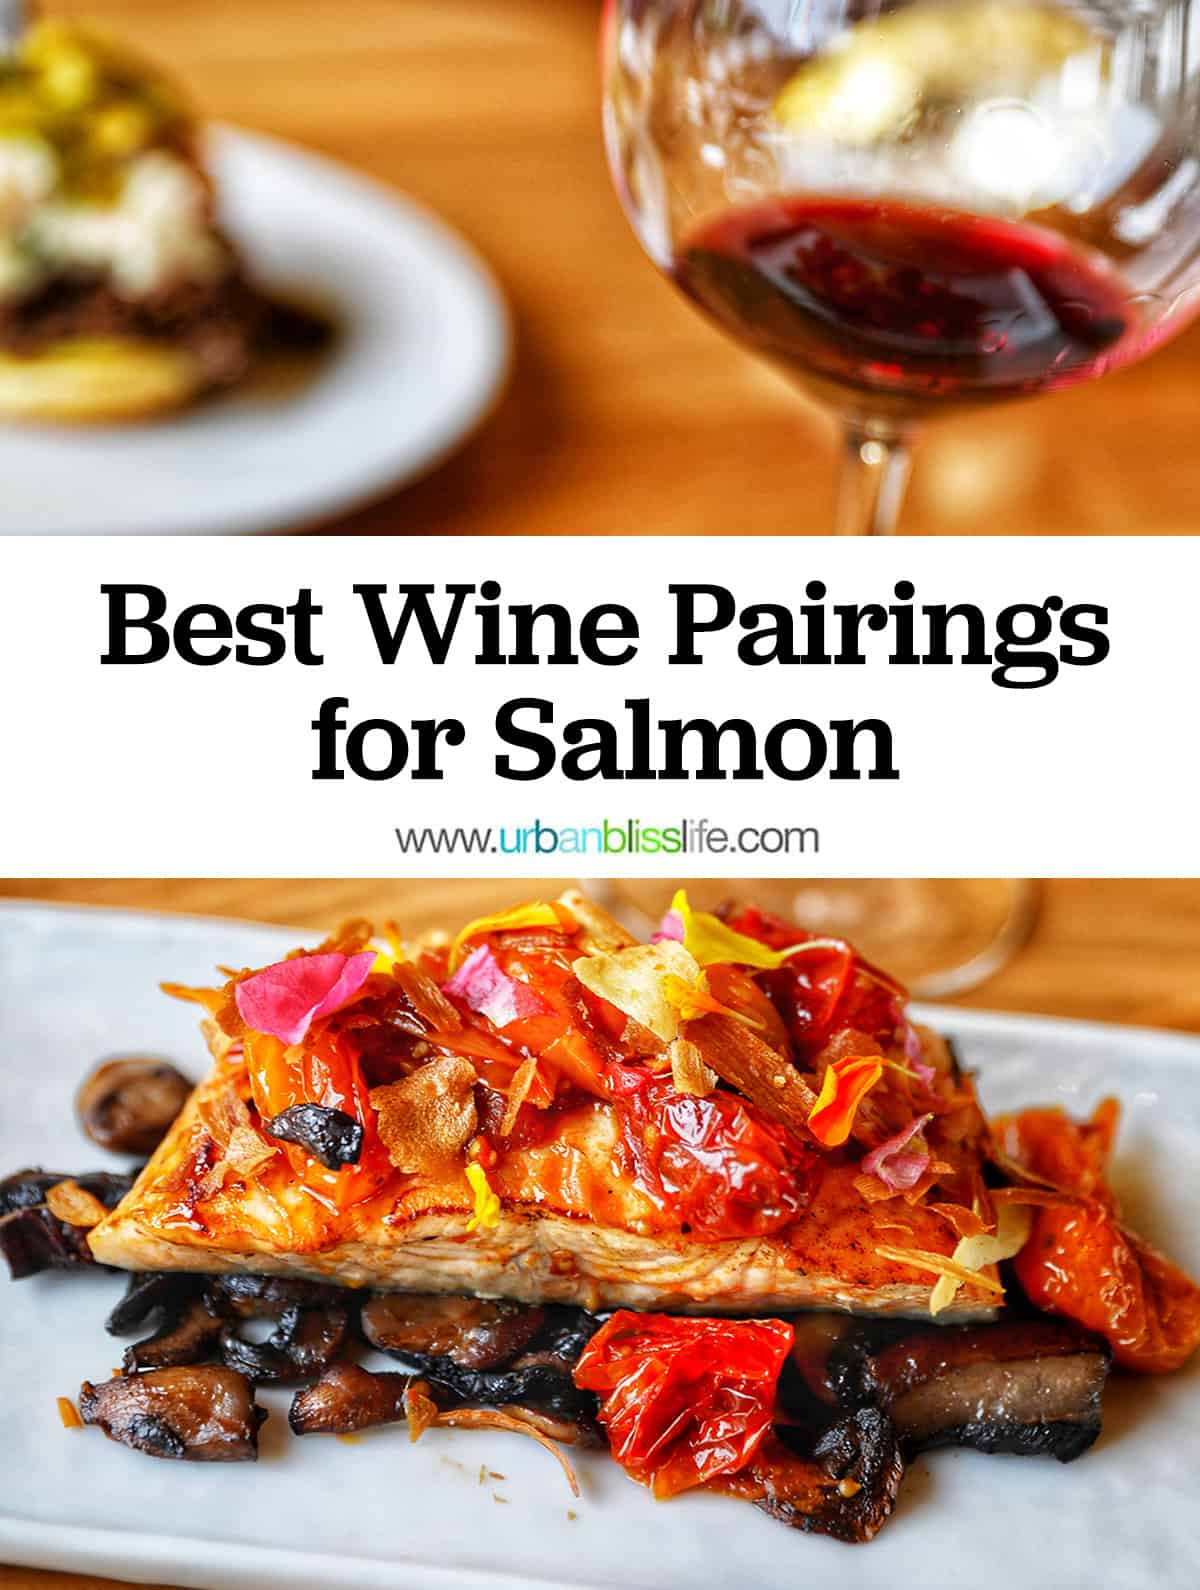 glass of pinot noir with beautiful salmon dish and title text "Best Wine Pairings for Salmon."